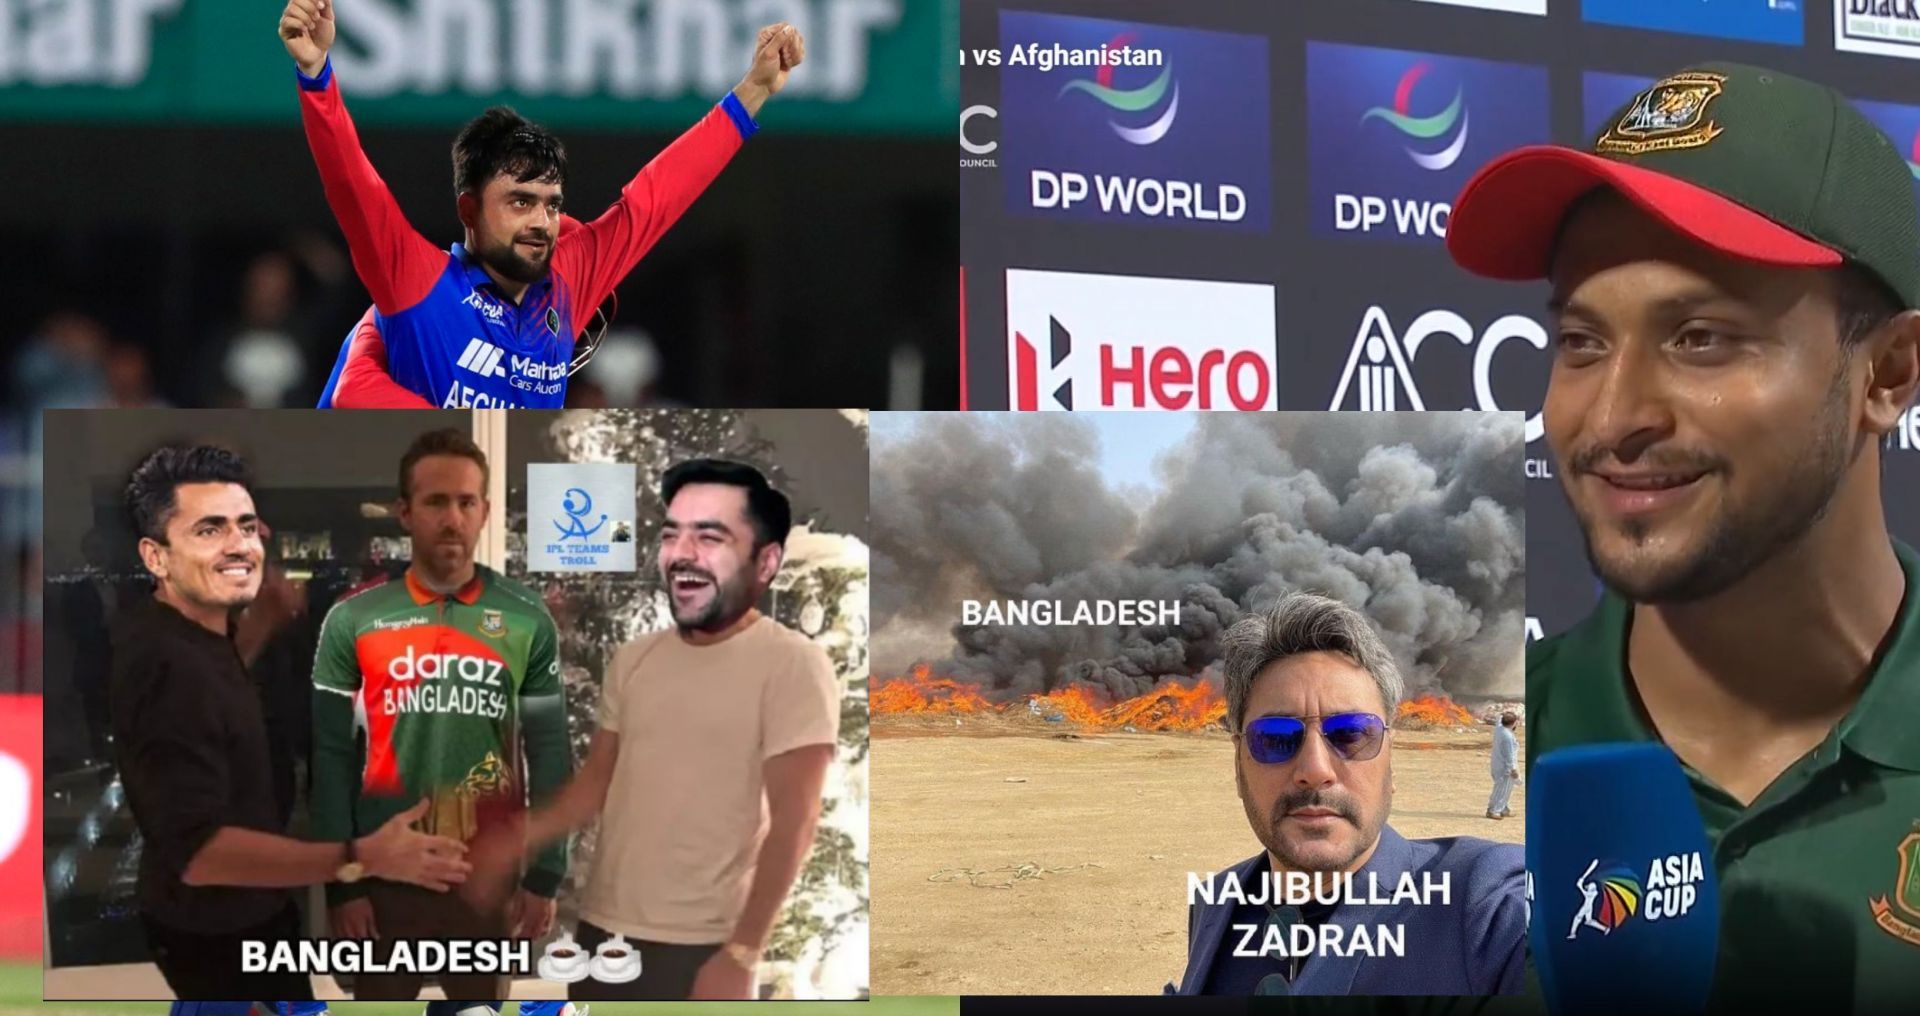 Fans took to social media to share memes after Bangladesh lost against Afghanistan on Tuesday